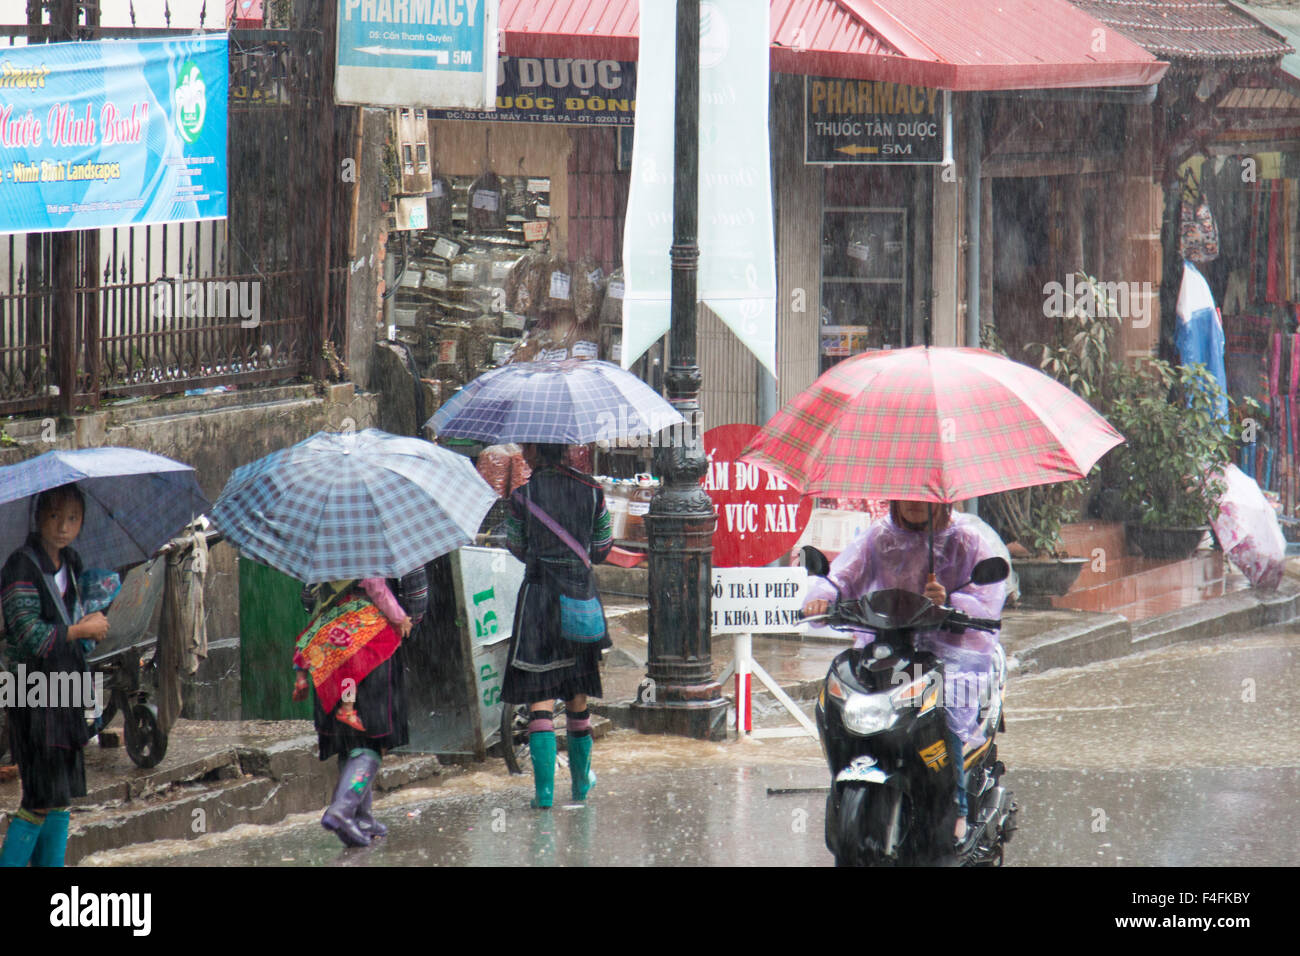 Sapa or Sa Pa is a frontier town in north west Vietnam, shots here in the rainy wet season as rider has umbrella up on scooter Stock Photo